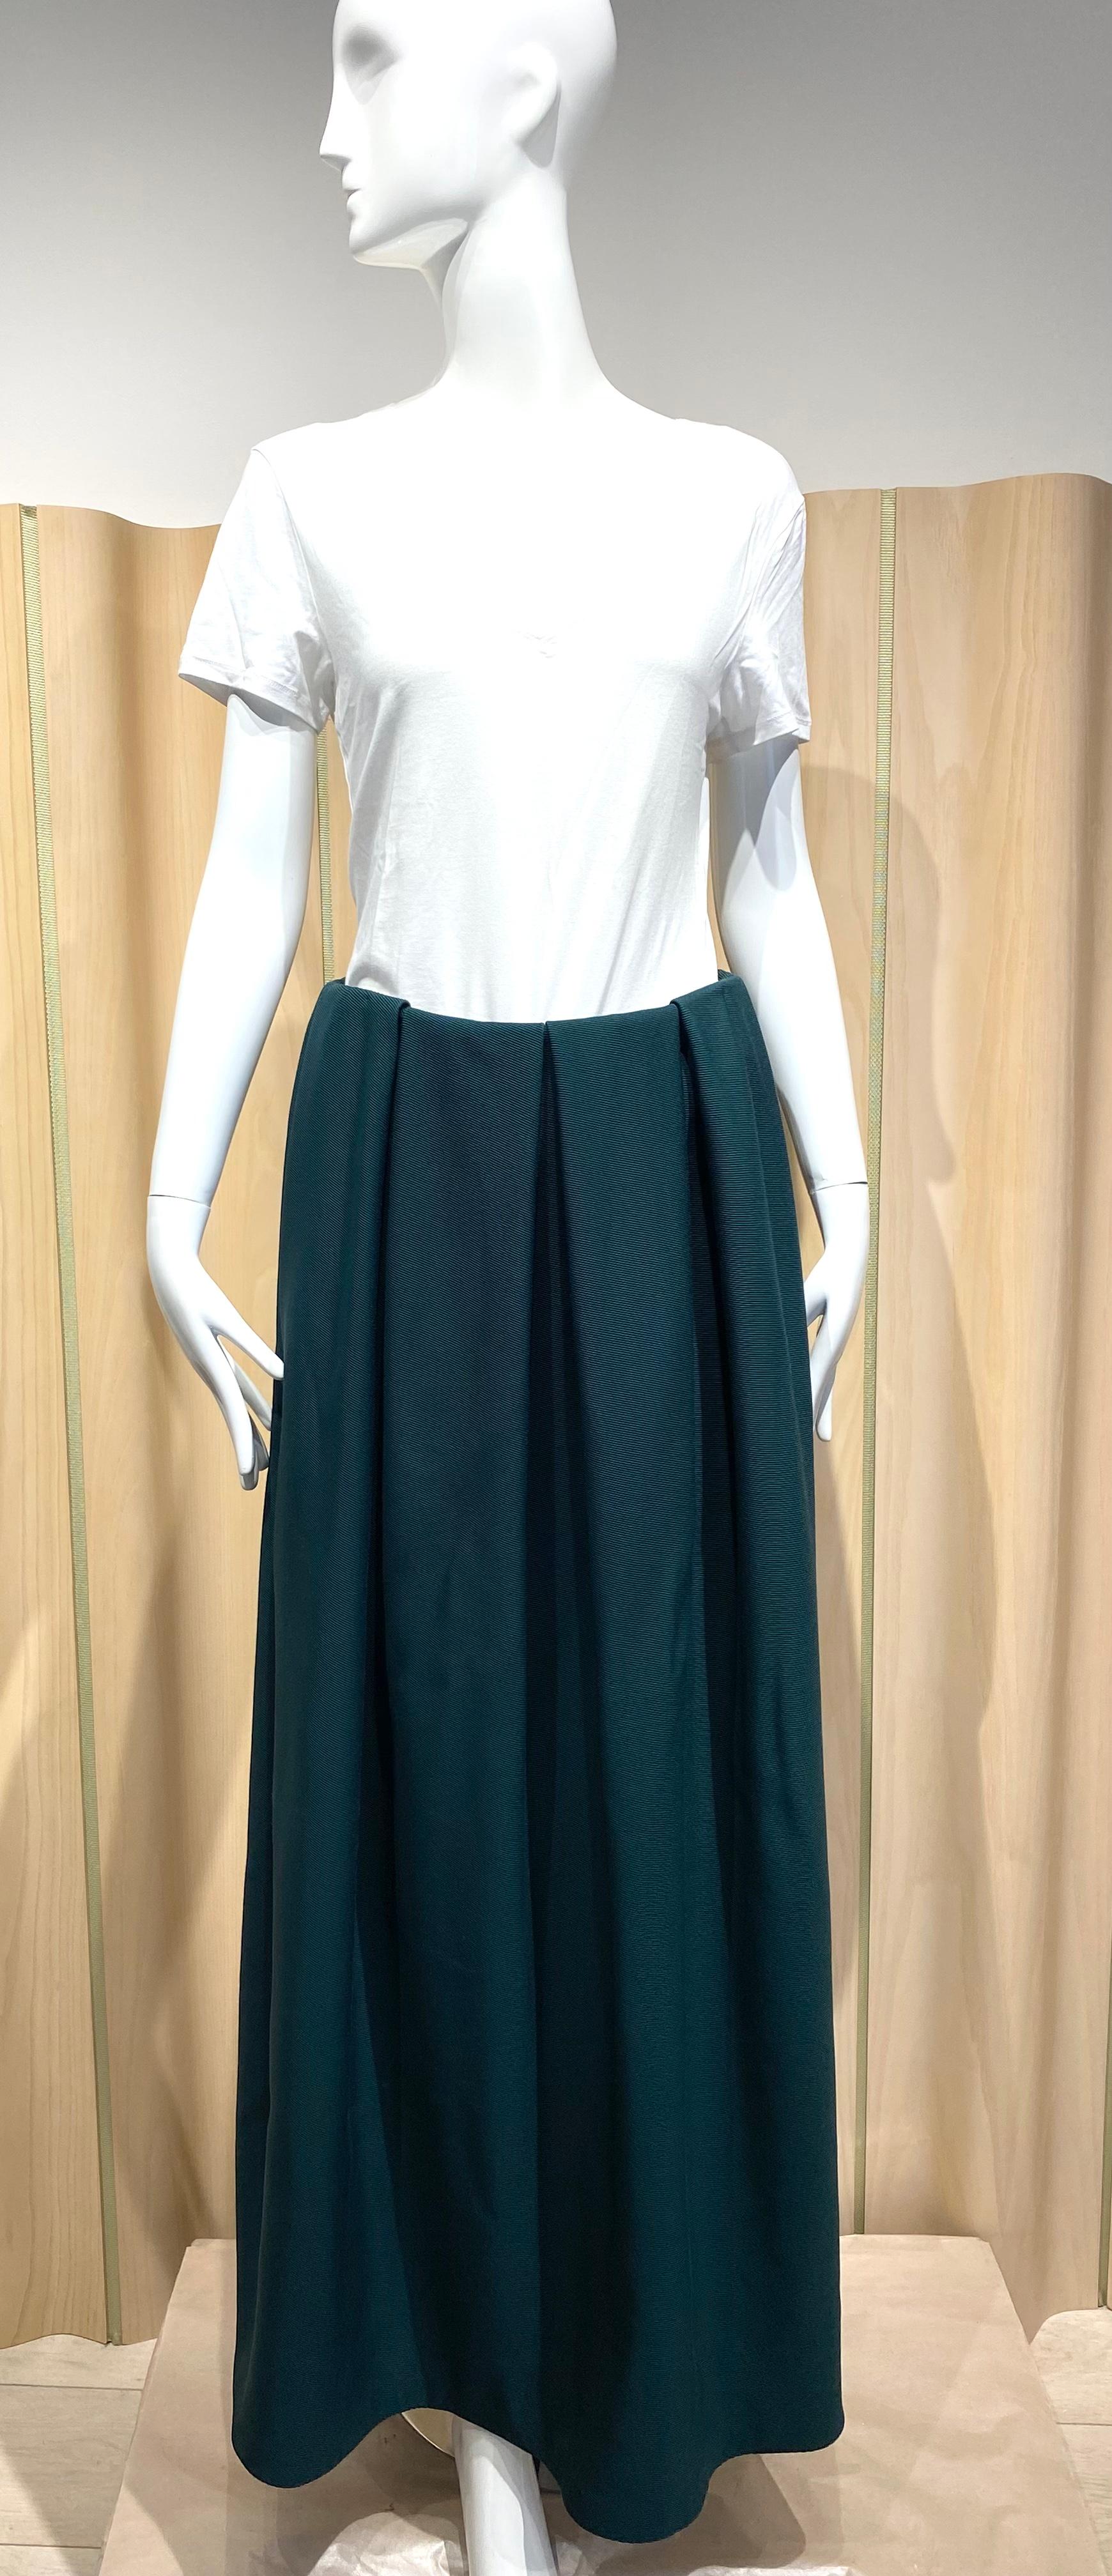 Jil Sander By Raf Simons Green Maxi Skirt In Excellent Condition For Sale In Beverly Hills, CA